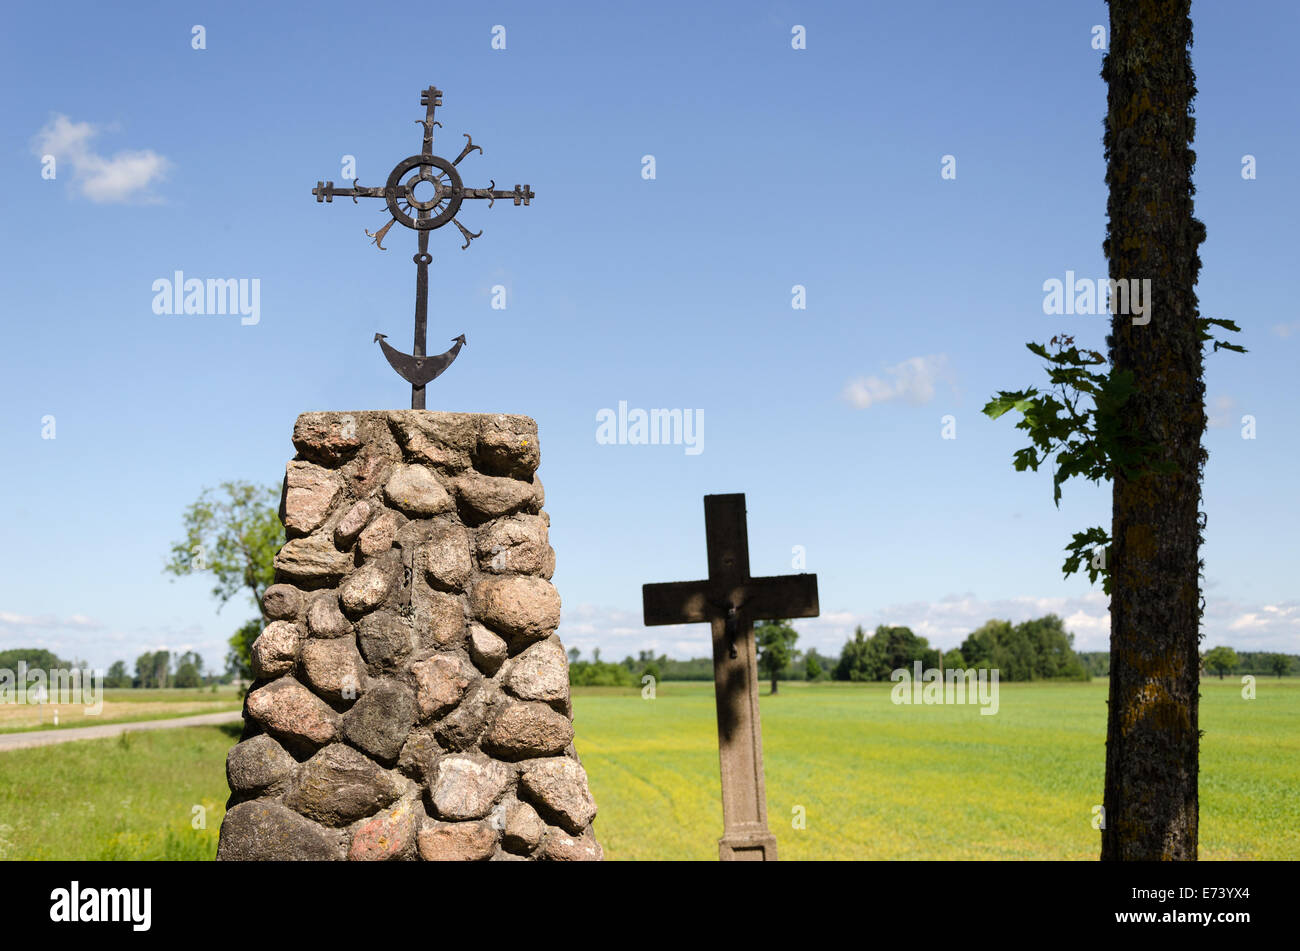 stone monument with metal ornament squirm cross in summer nature Stock Photo